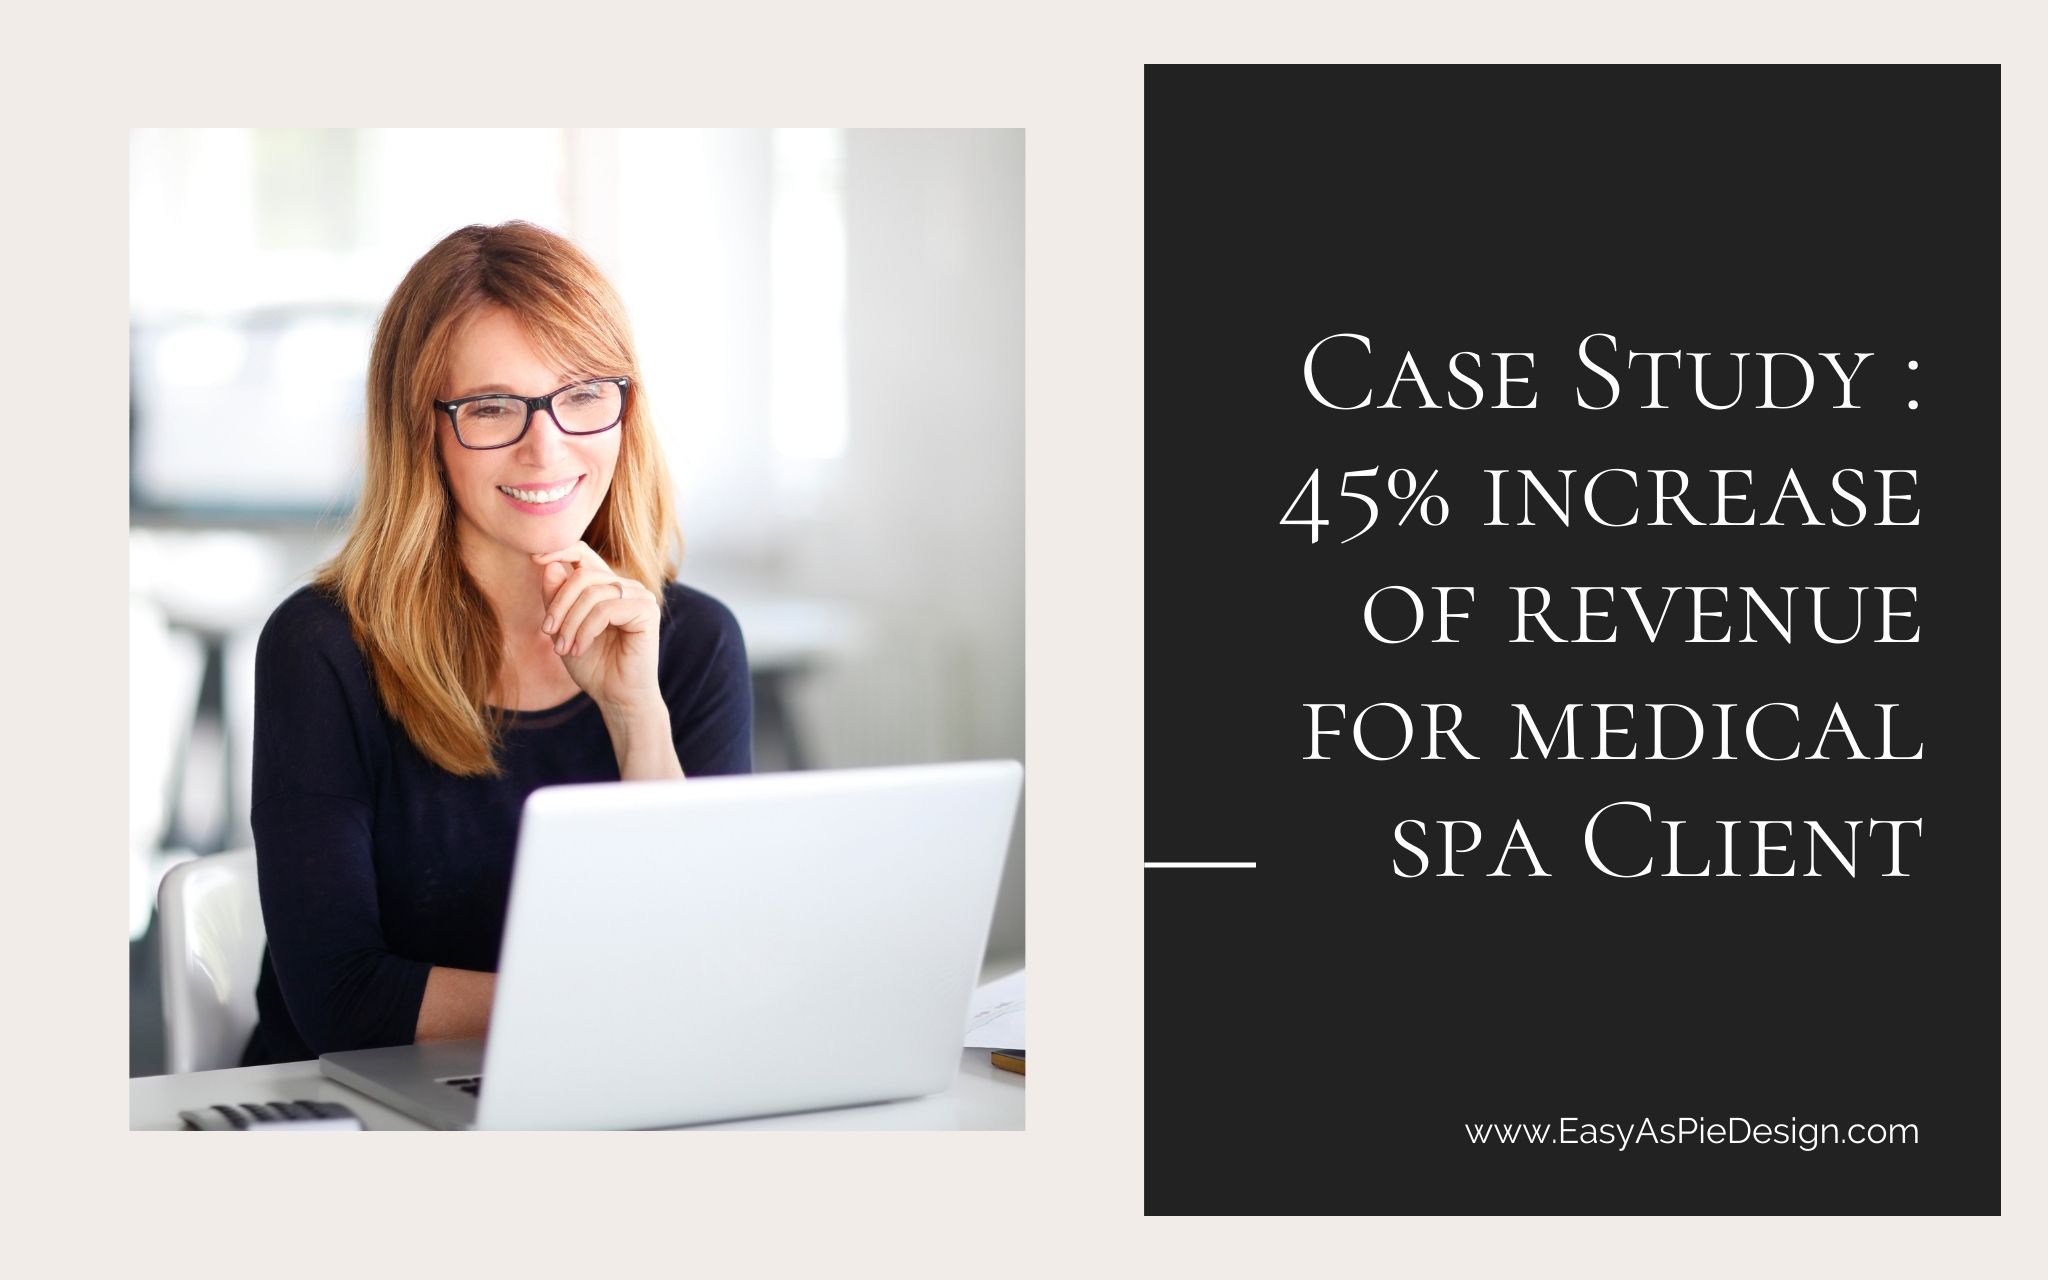 Case Study : 45% increase of revenue for medical spa Client